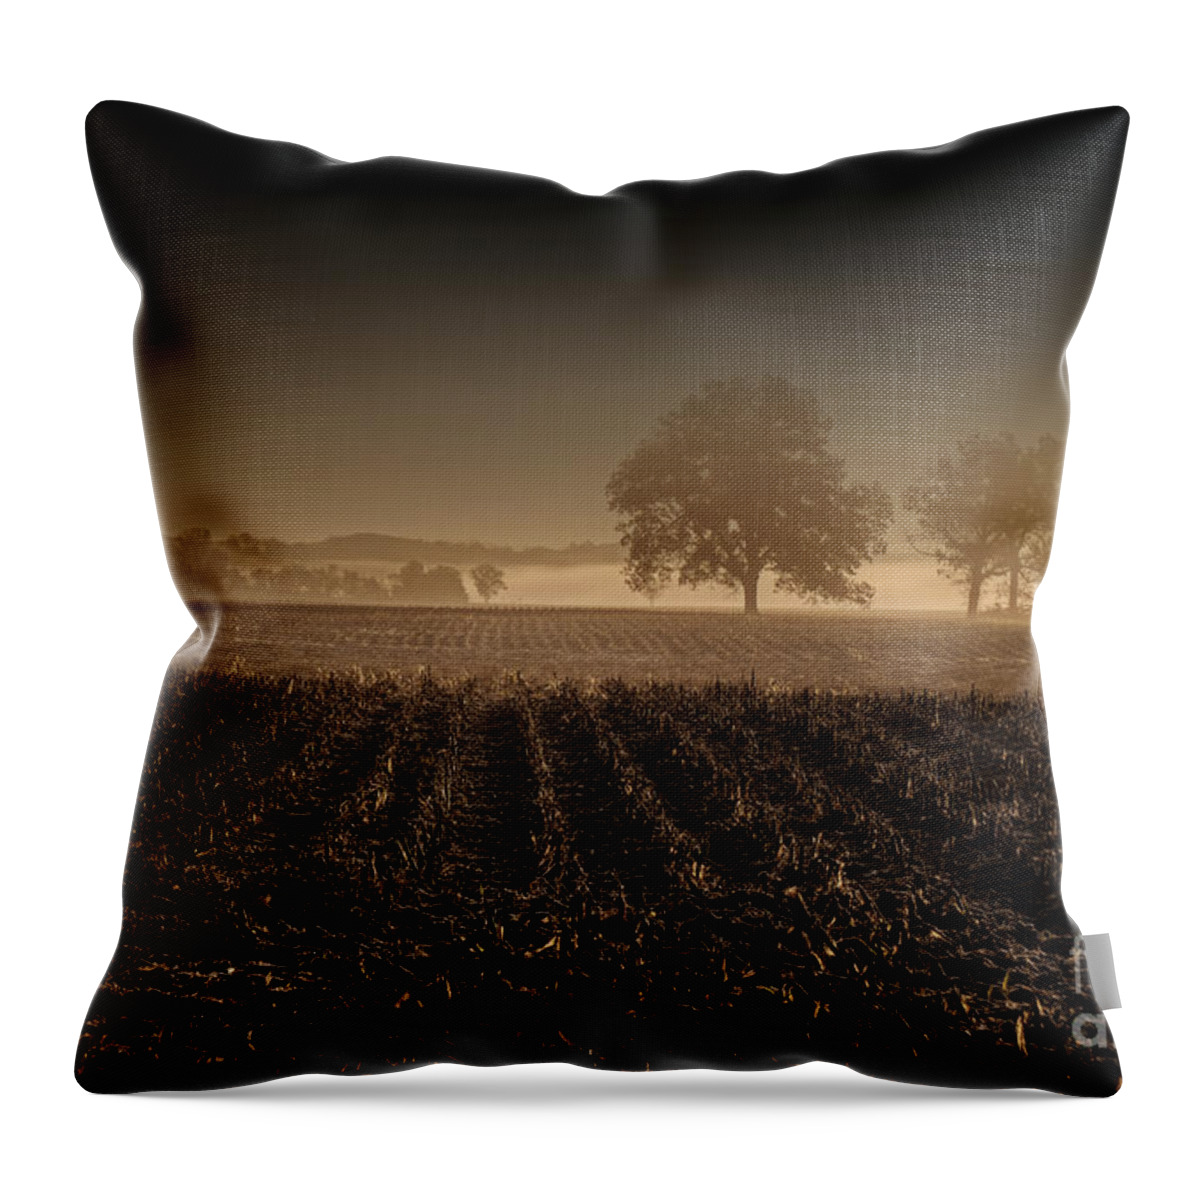 A Tree Poem In The Mist Throw Pillow featuring the digital art A Tree Poem in the Mist by William Fields